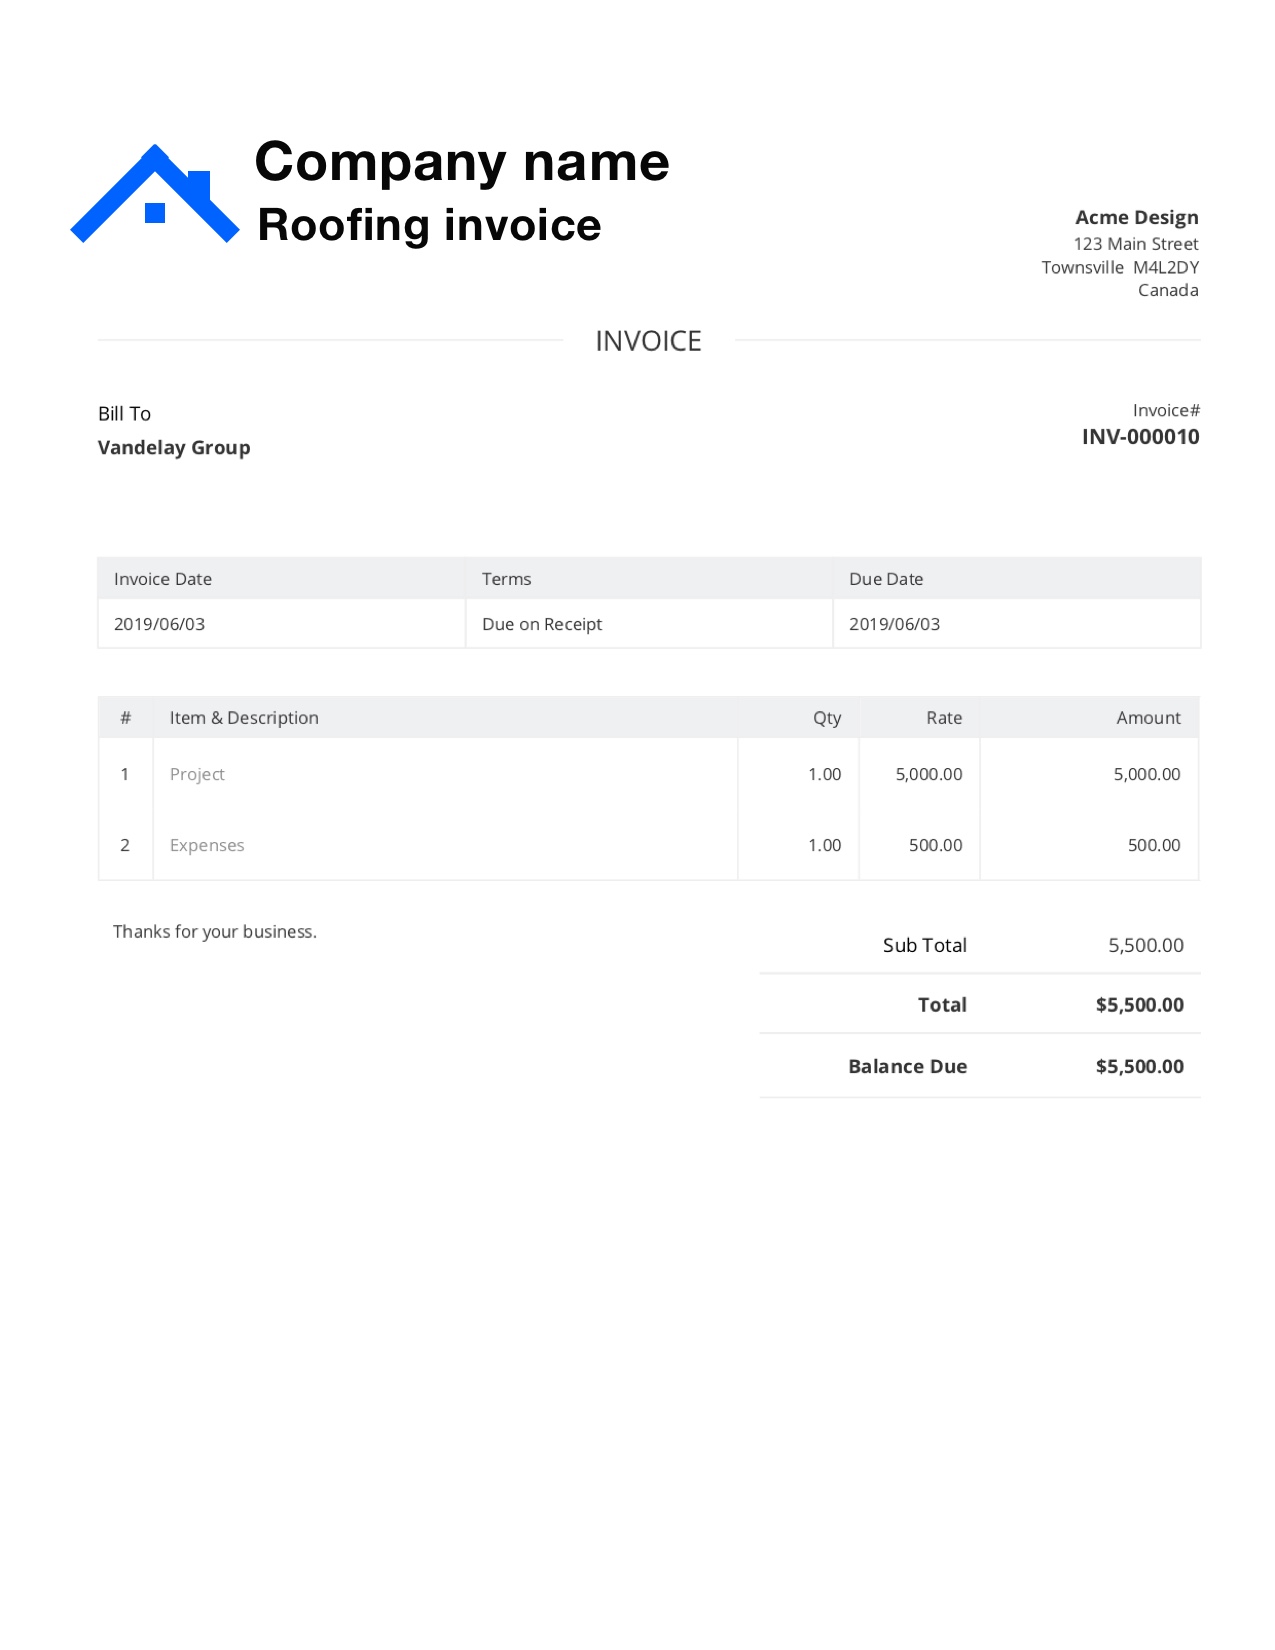 Free Roofing Invoice Template. Customize and Send in 21 Seconds Intended For Free Roofing Invoice Template